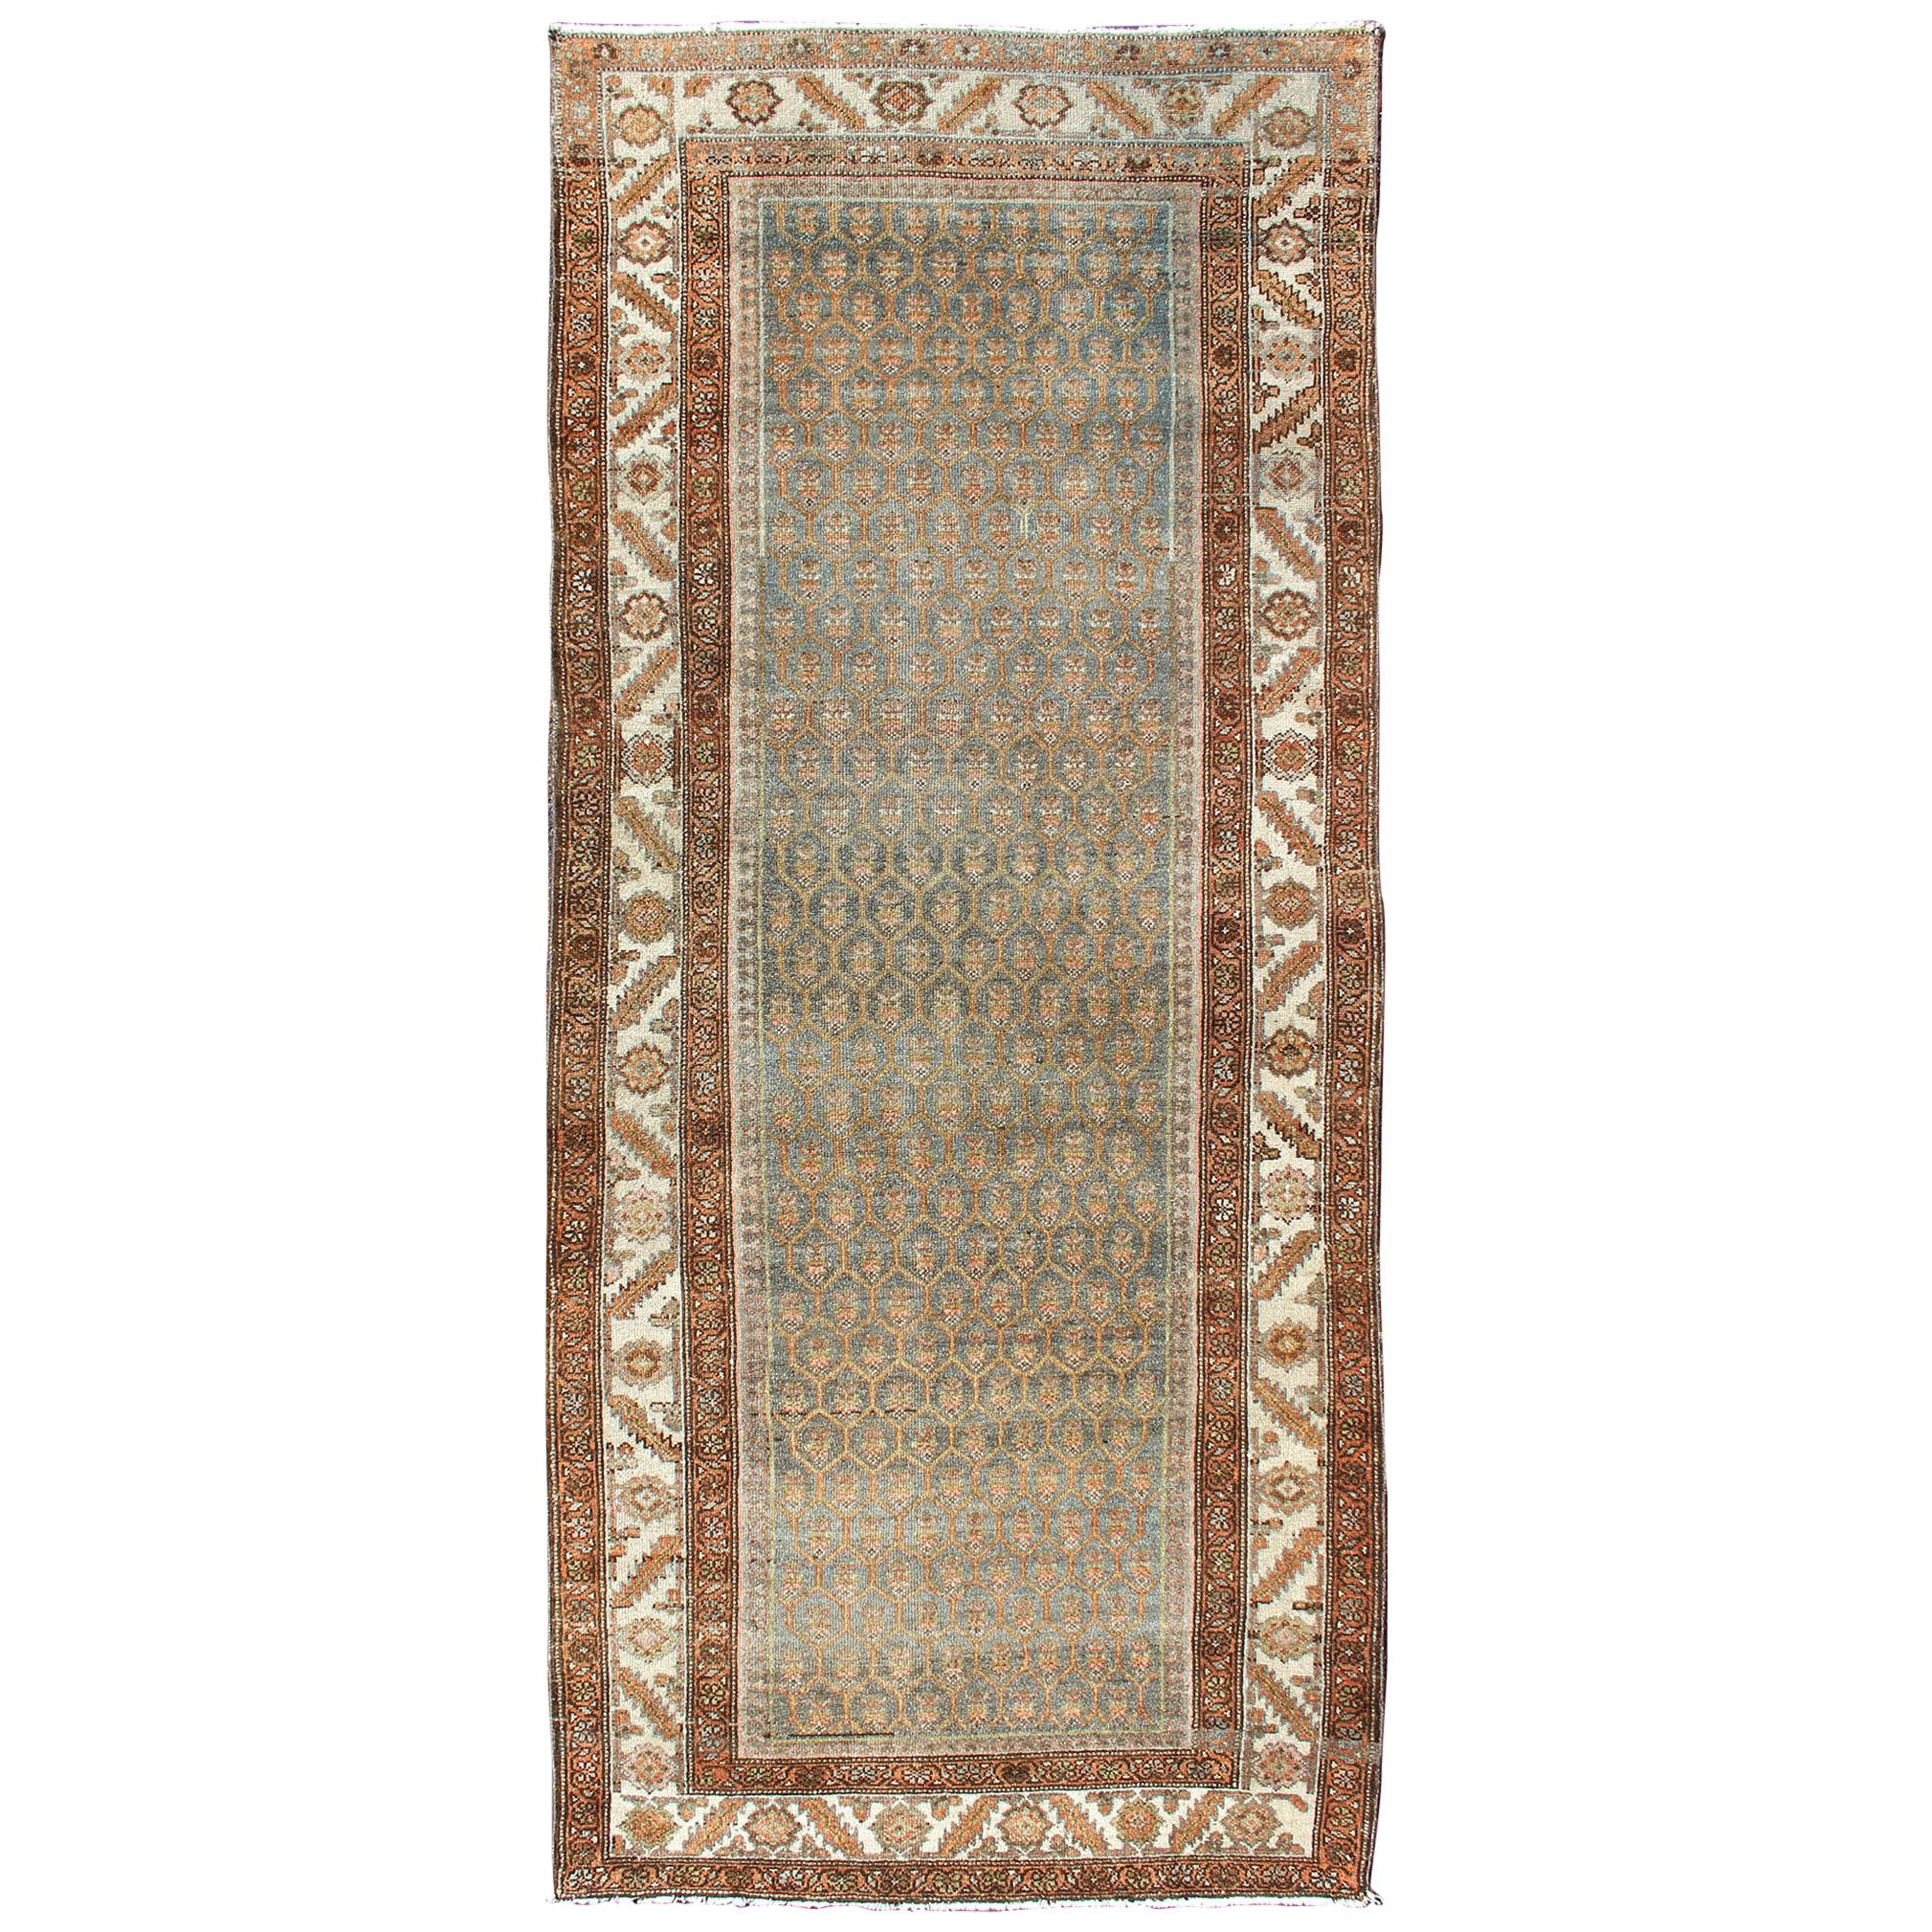 Antique Persian Hamedan Wide Runner with All-Over Design in Unique Color Tone